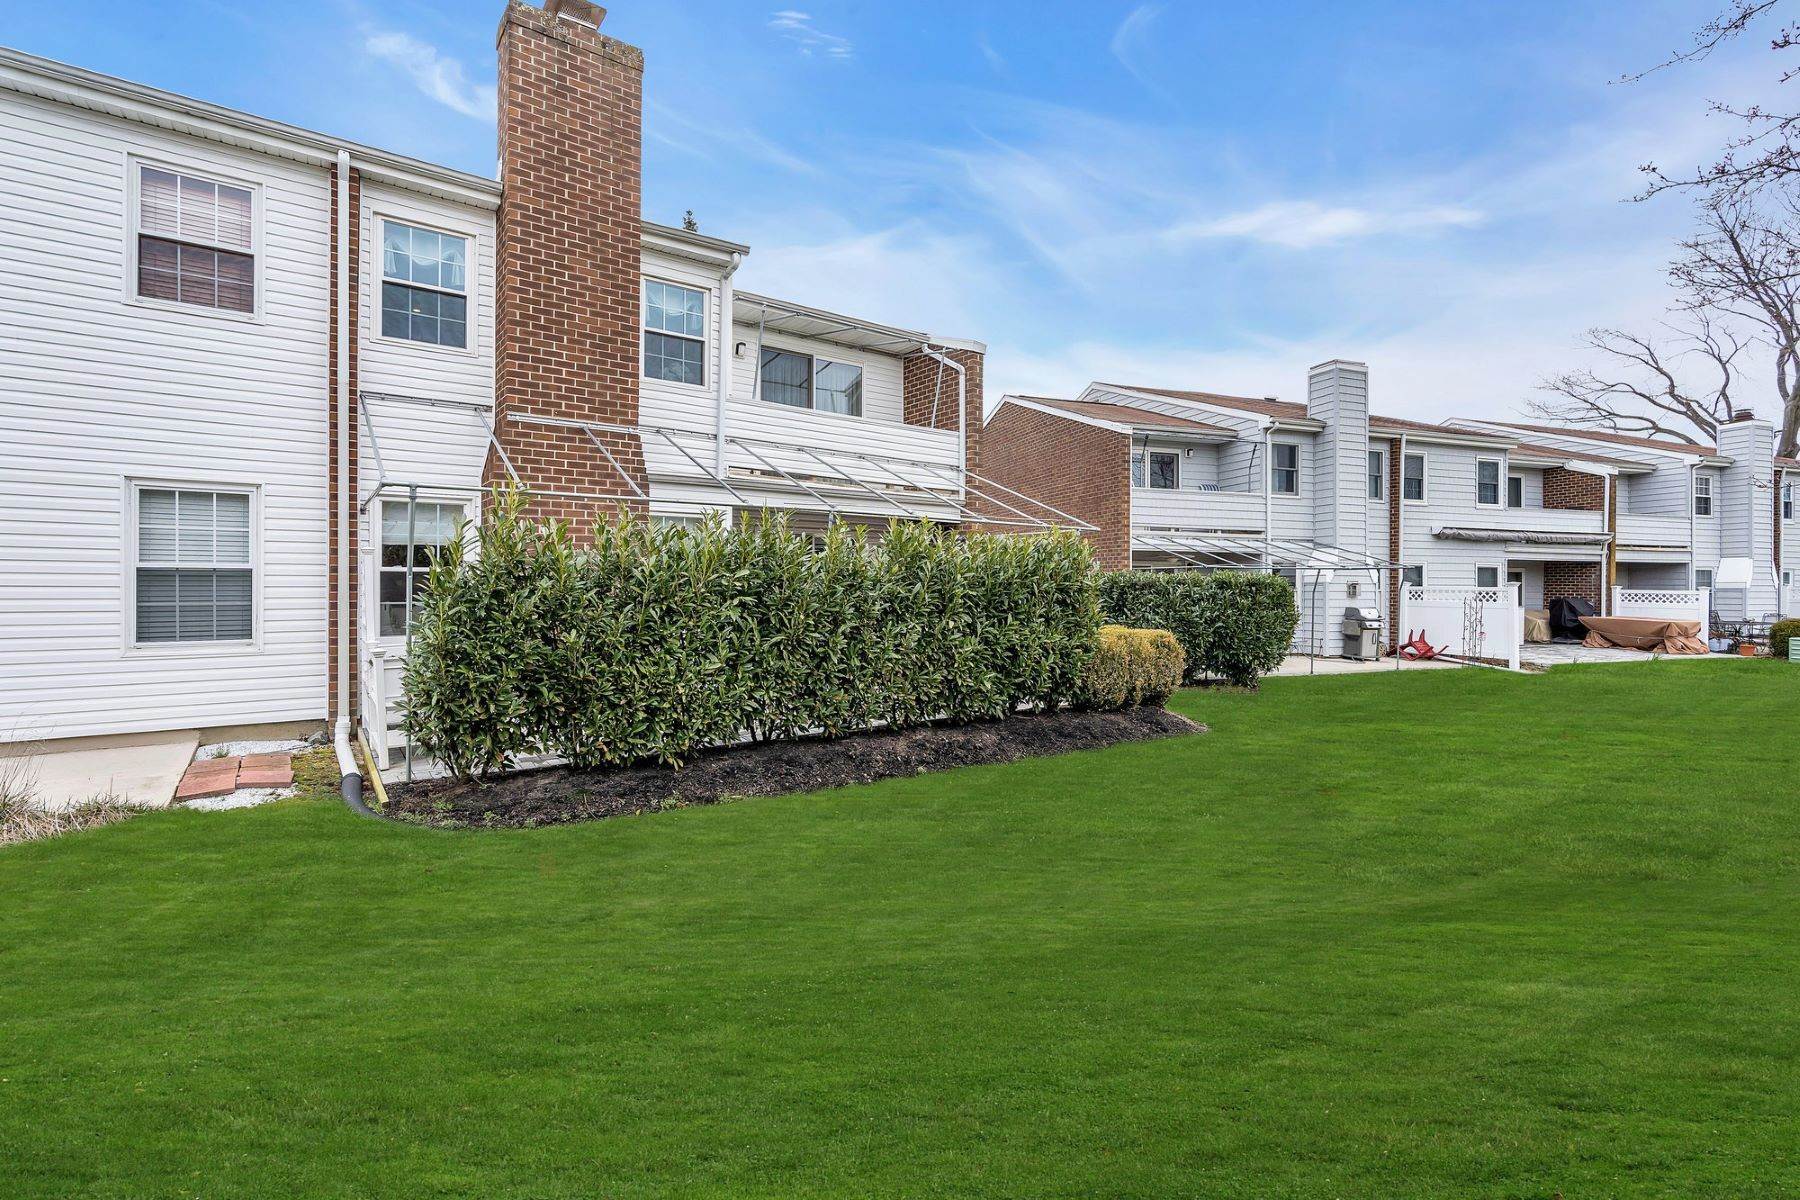 41. Condominiums for Sale at Fairway Mews 87 Walnut Drive Spring Lake Heights, New Jersey 07762 United States